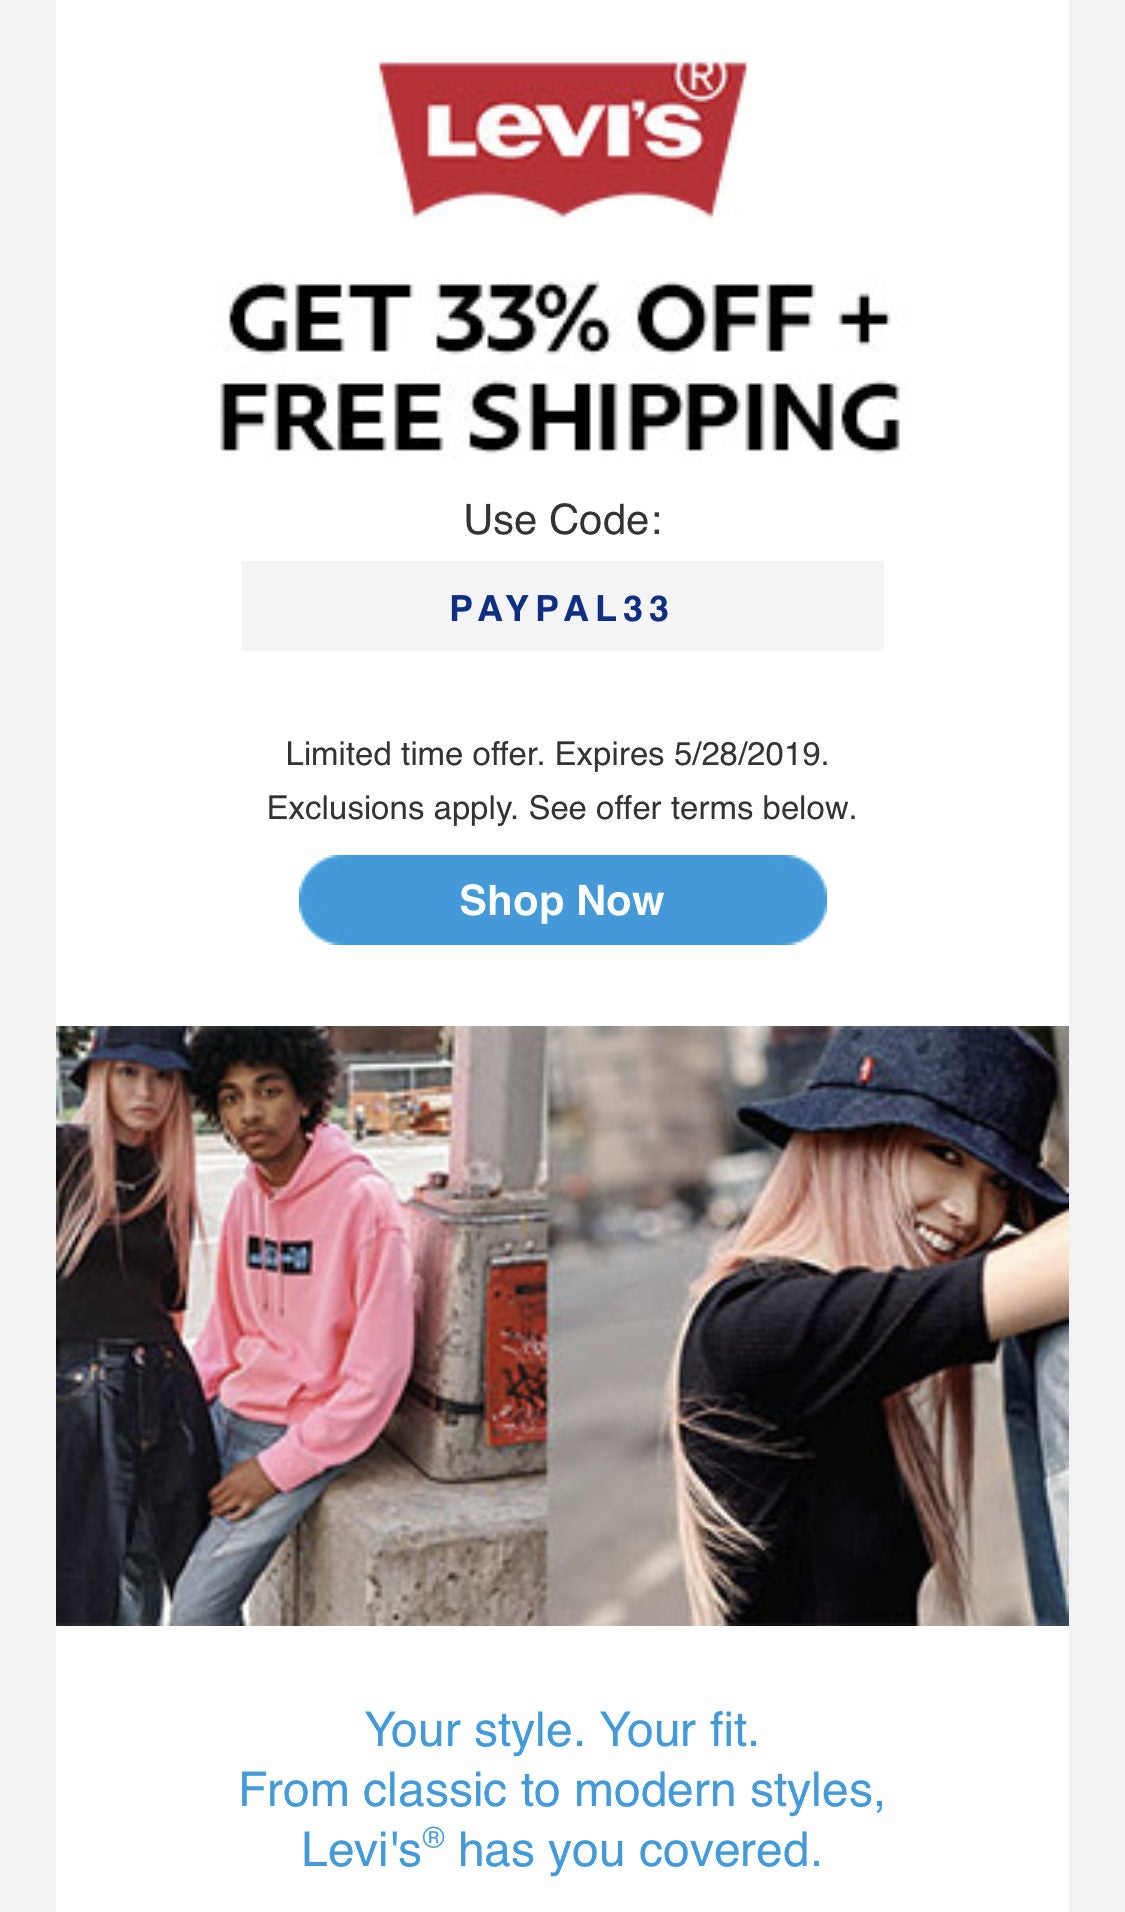 Levi's Online Store . Saving with Paypal Canada] [Levi's Canada] Get 33%  off and FS with paypal promo code  Forums